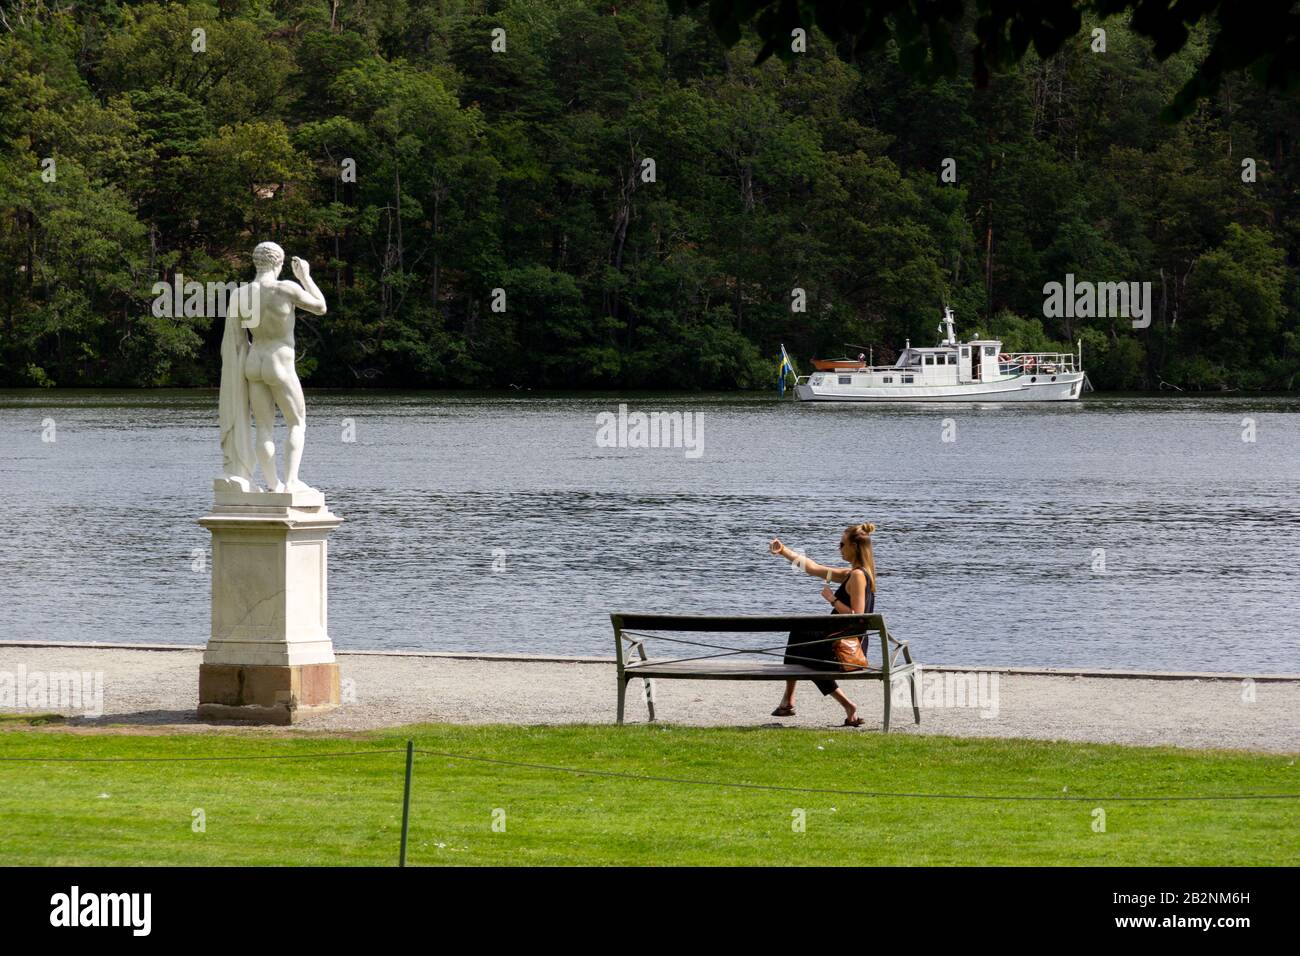 Stockholm, Sweden - July 13, 2019: A woman sitting on a bench next to a statue and water taking a selfie in the wonderful Drottningholm. Stock Photo